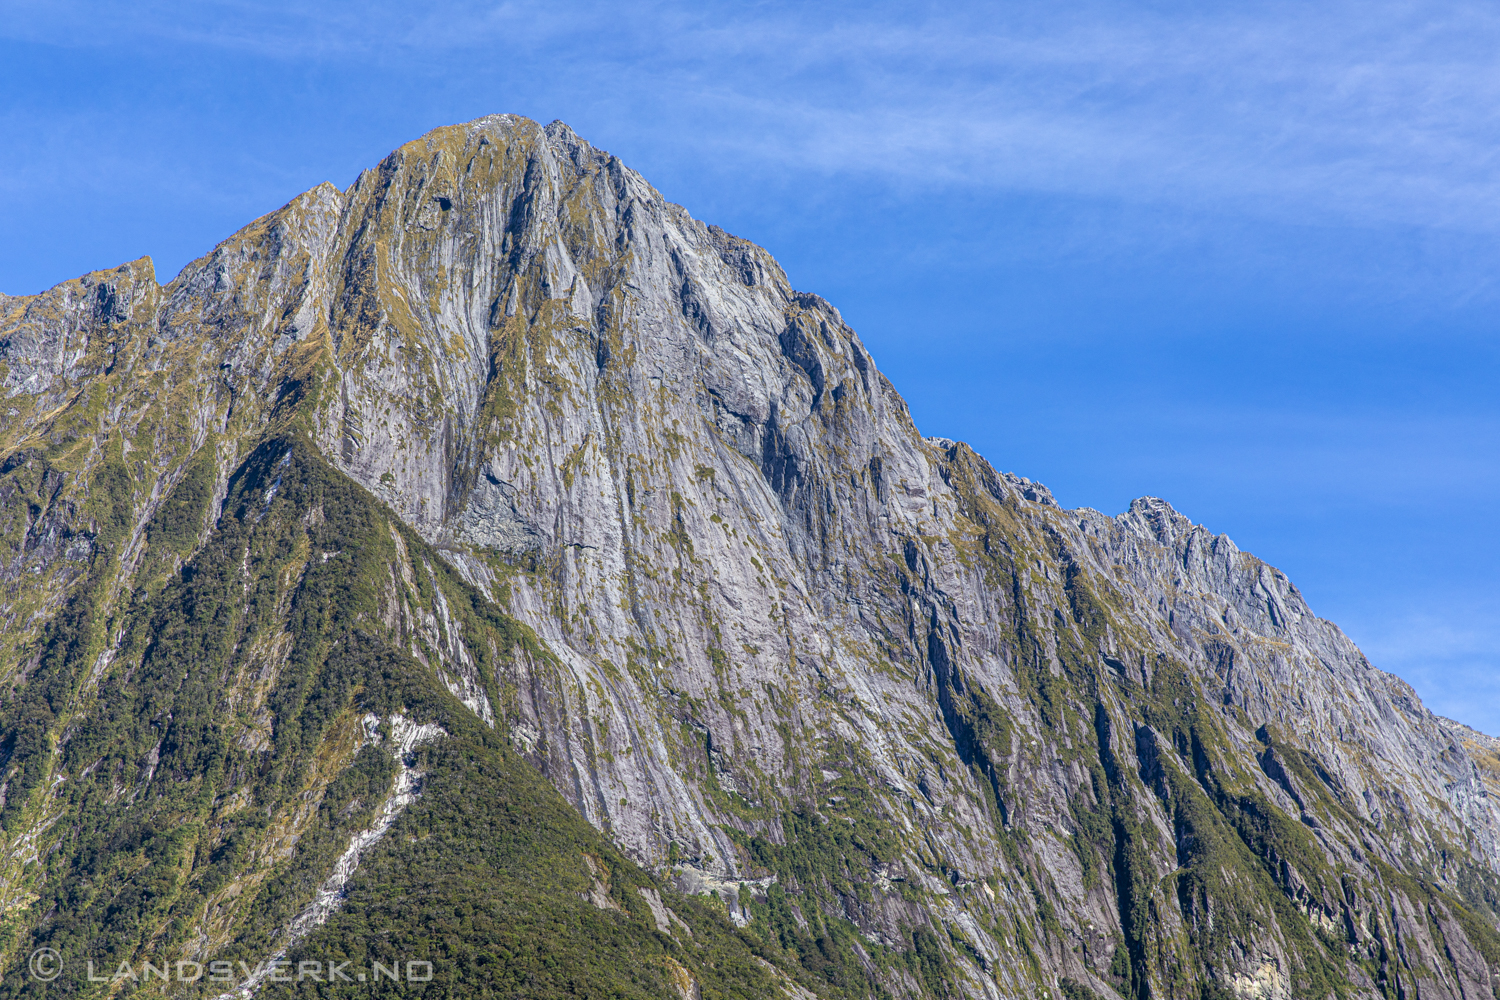 Milford Sounds, New Zealand. 

(Canon EOS 5D Mark IV / Canon EF 24-70mm f/2.8 L II USM)